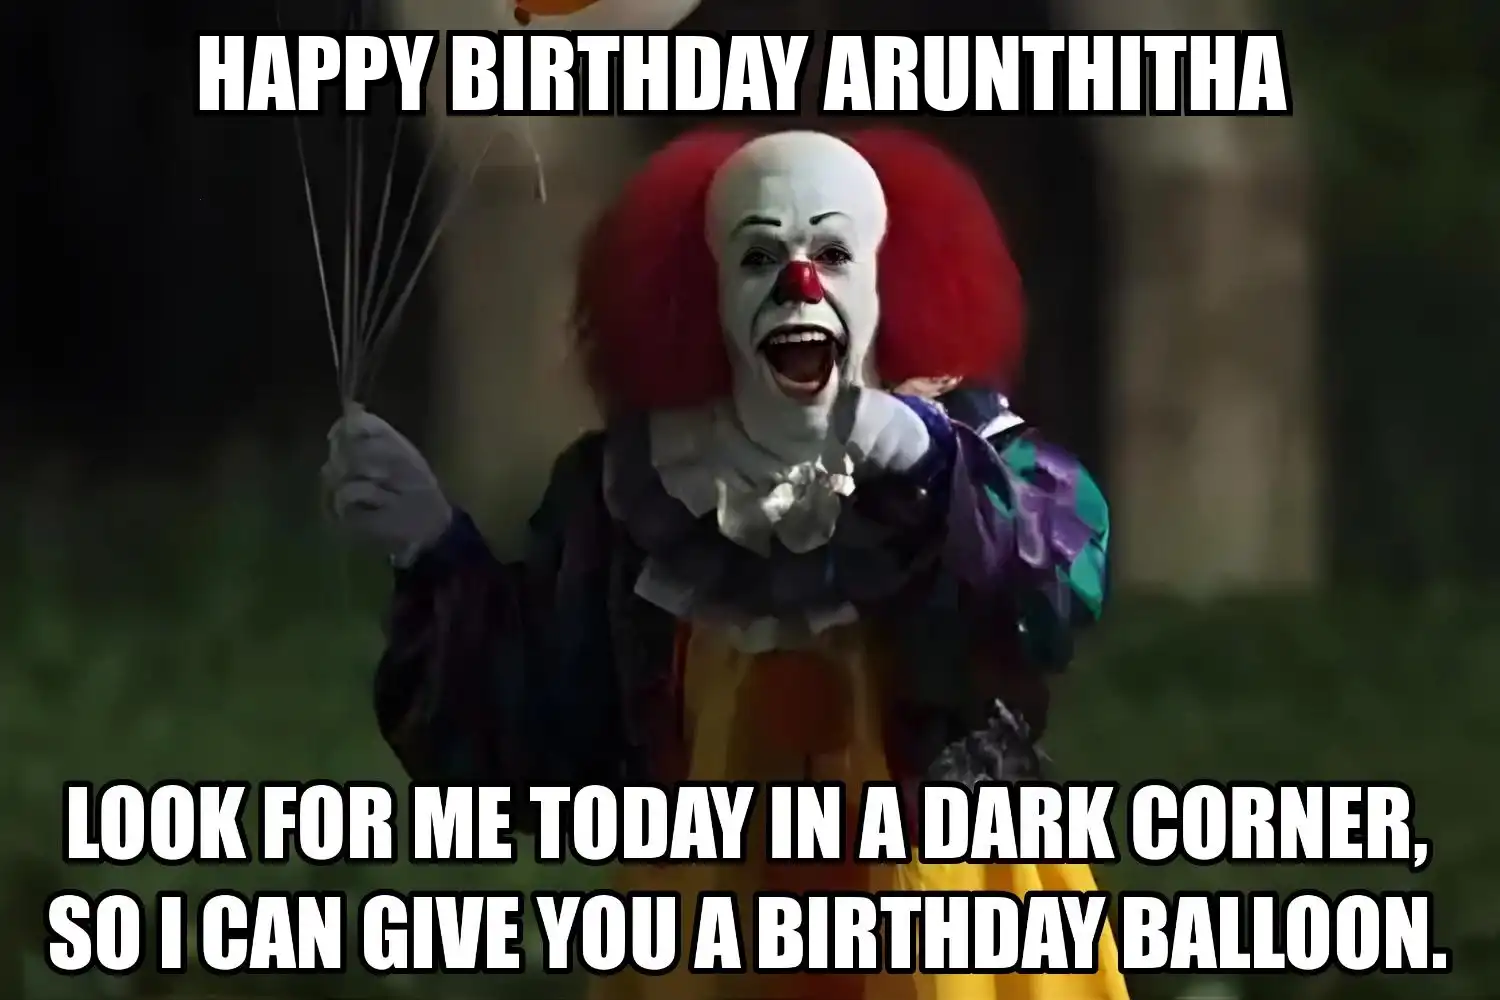 Happy Birthday Arunthitha I Can Give You A Balloon Meme